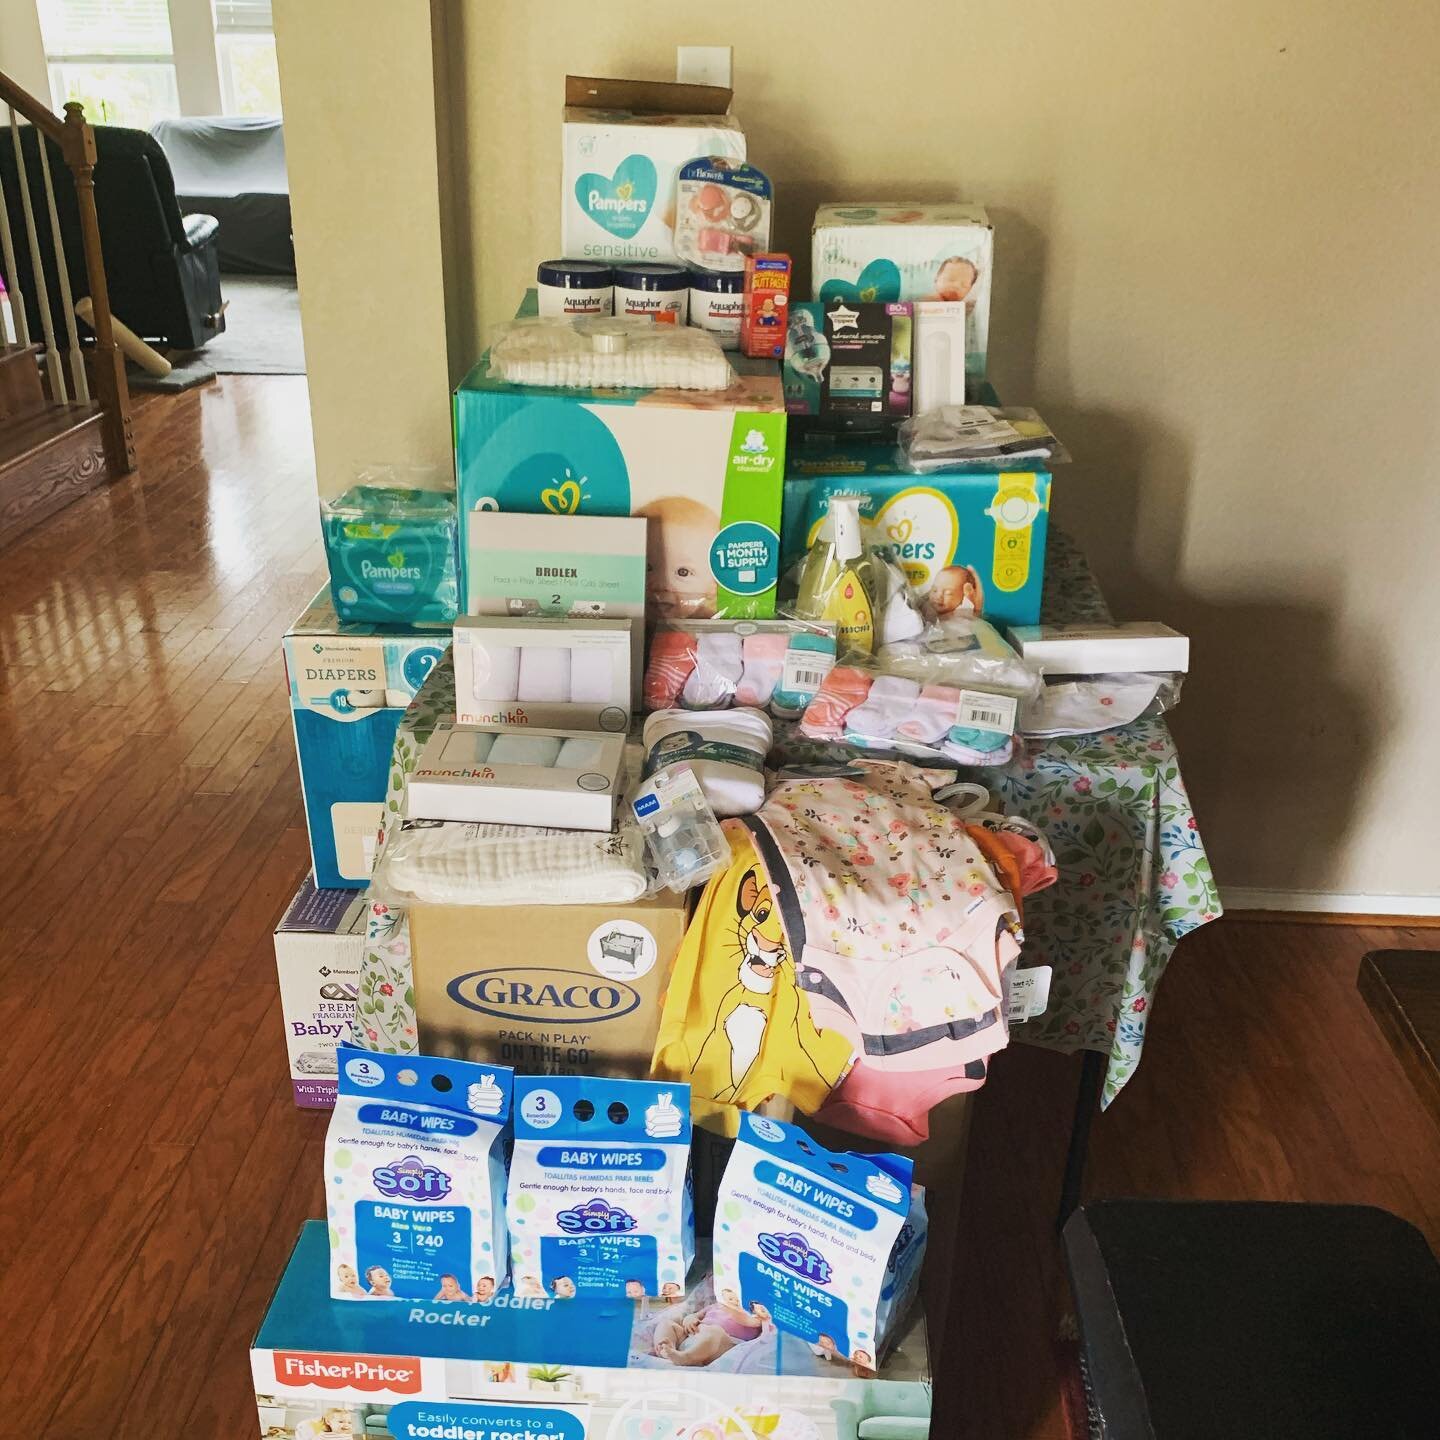 Many thanks to @presbyrista for gathering our women and these gifts  for the Real Options For Women center in Plano. These items will help equip 4 expectant mothers and their newborns.